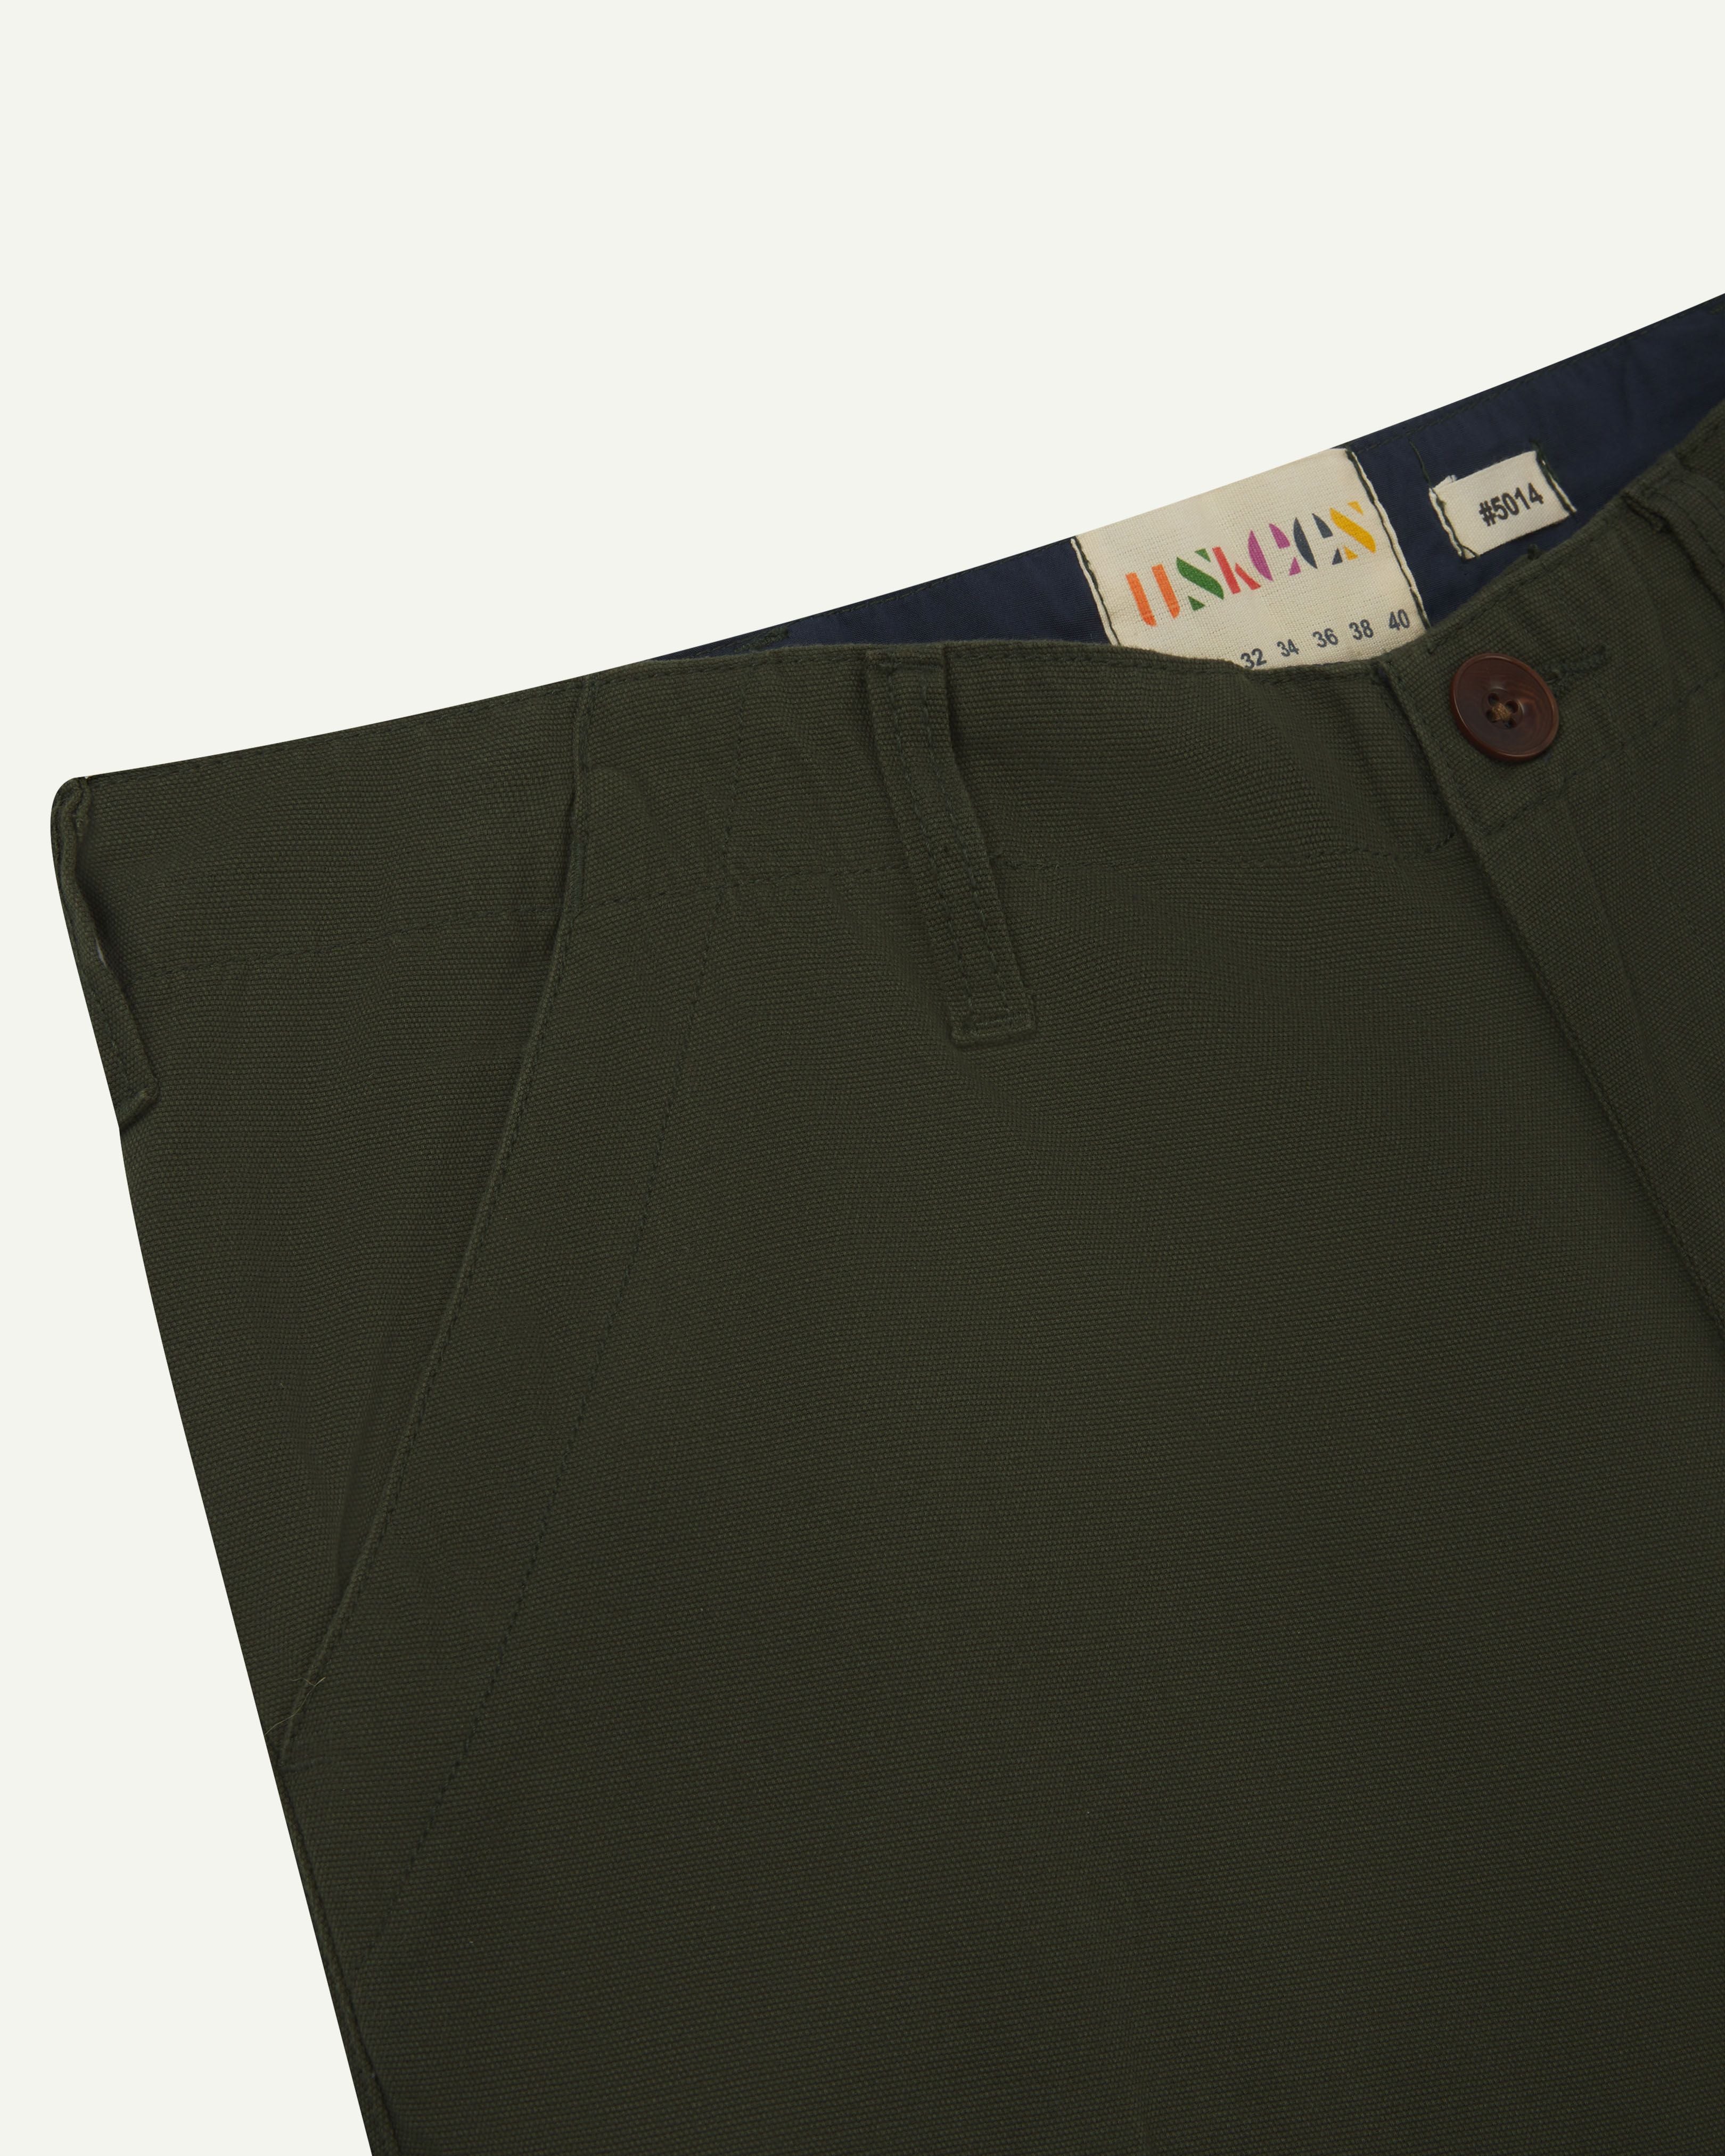 Close up view of #5014 Uskees men's organic cotton 'vine green' cargo trousers showing size label and front pocket